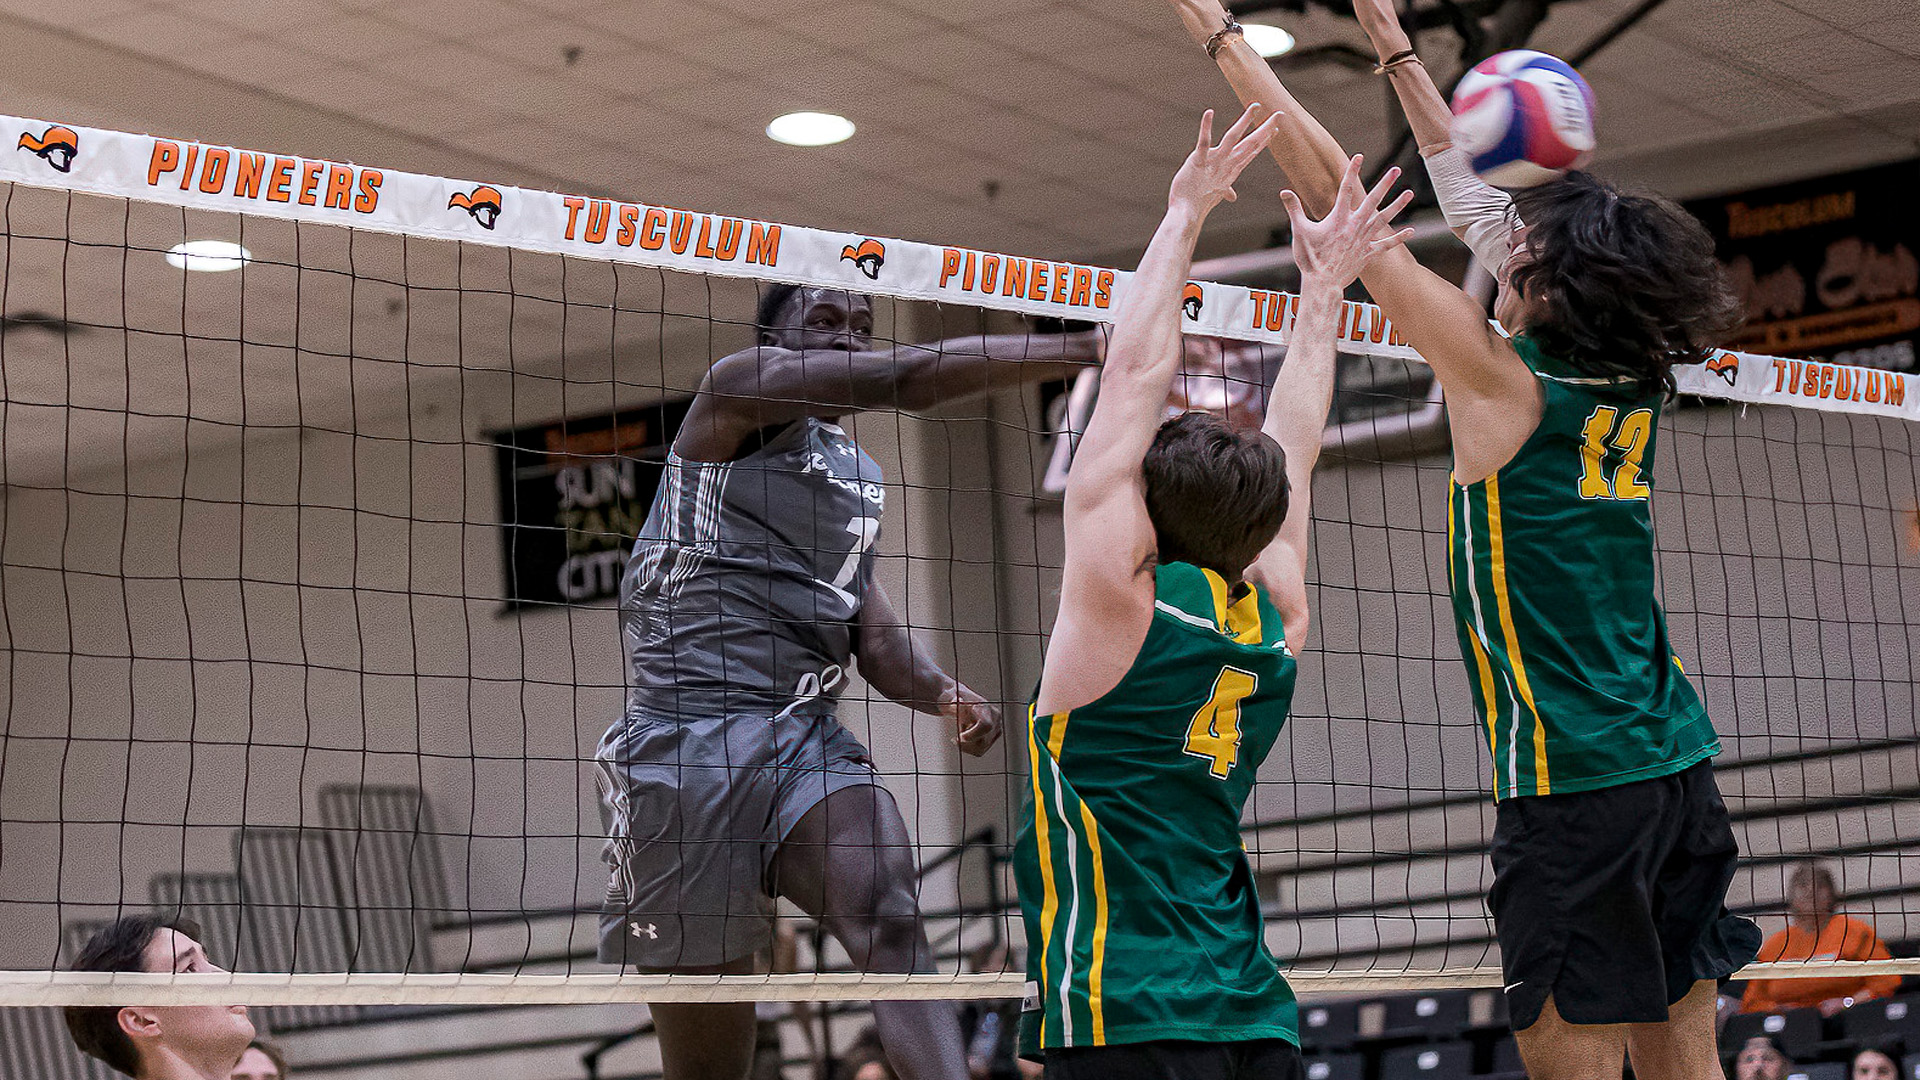 Tusculum clinches season sweep over Lees-McRae